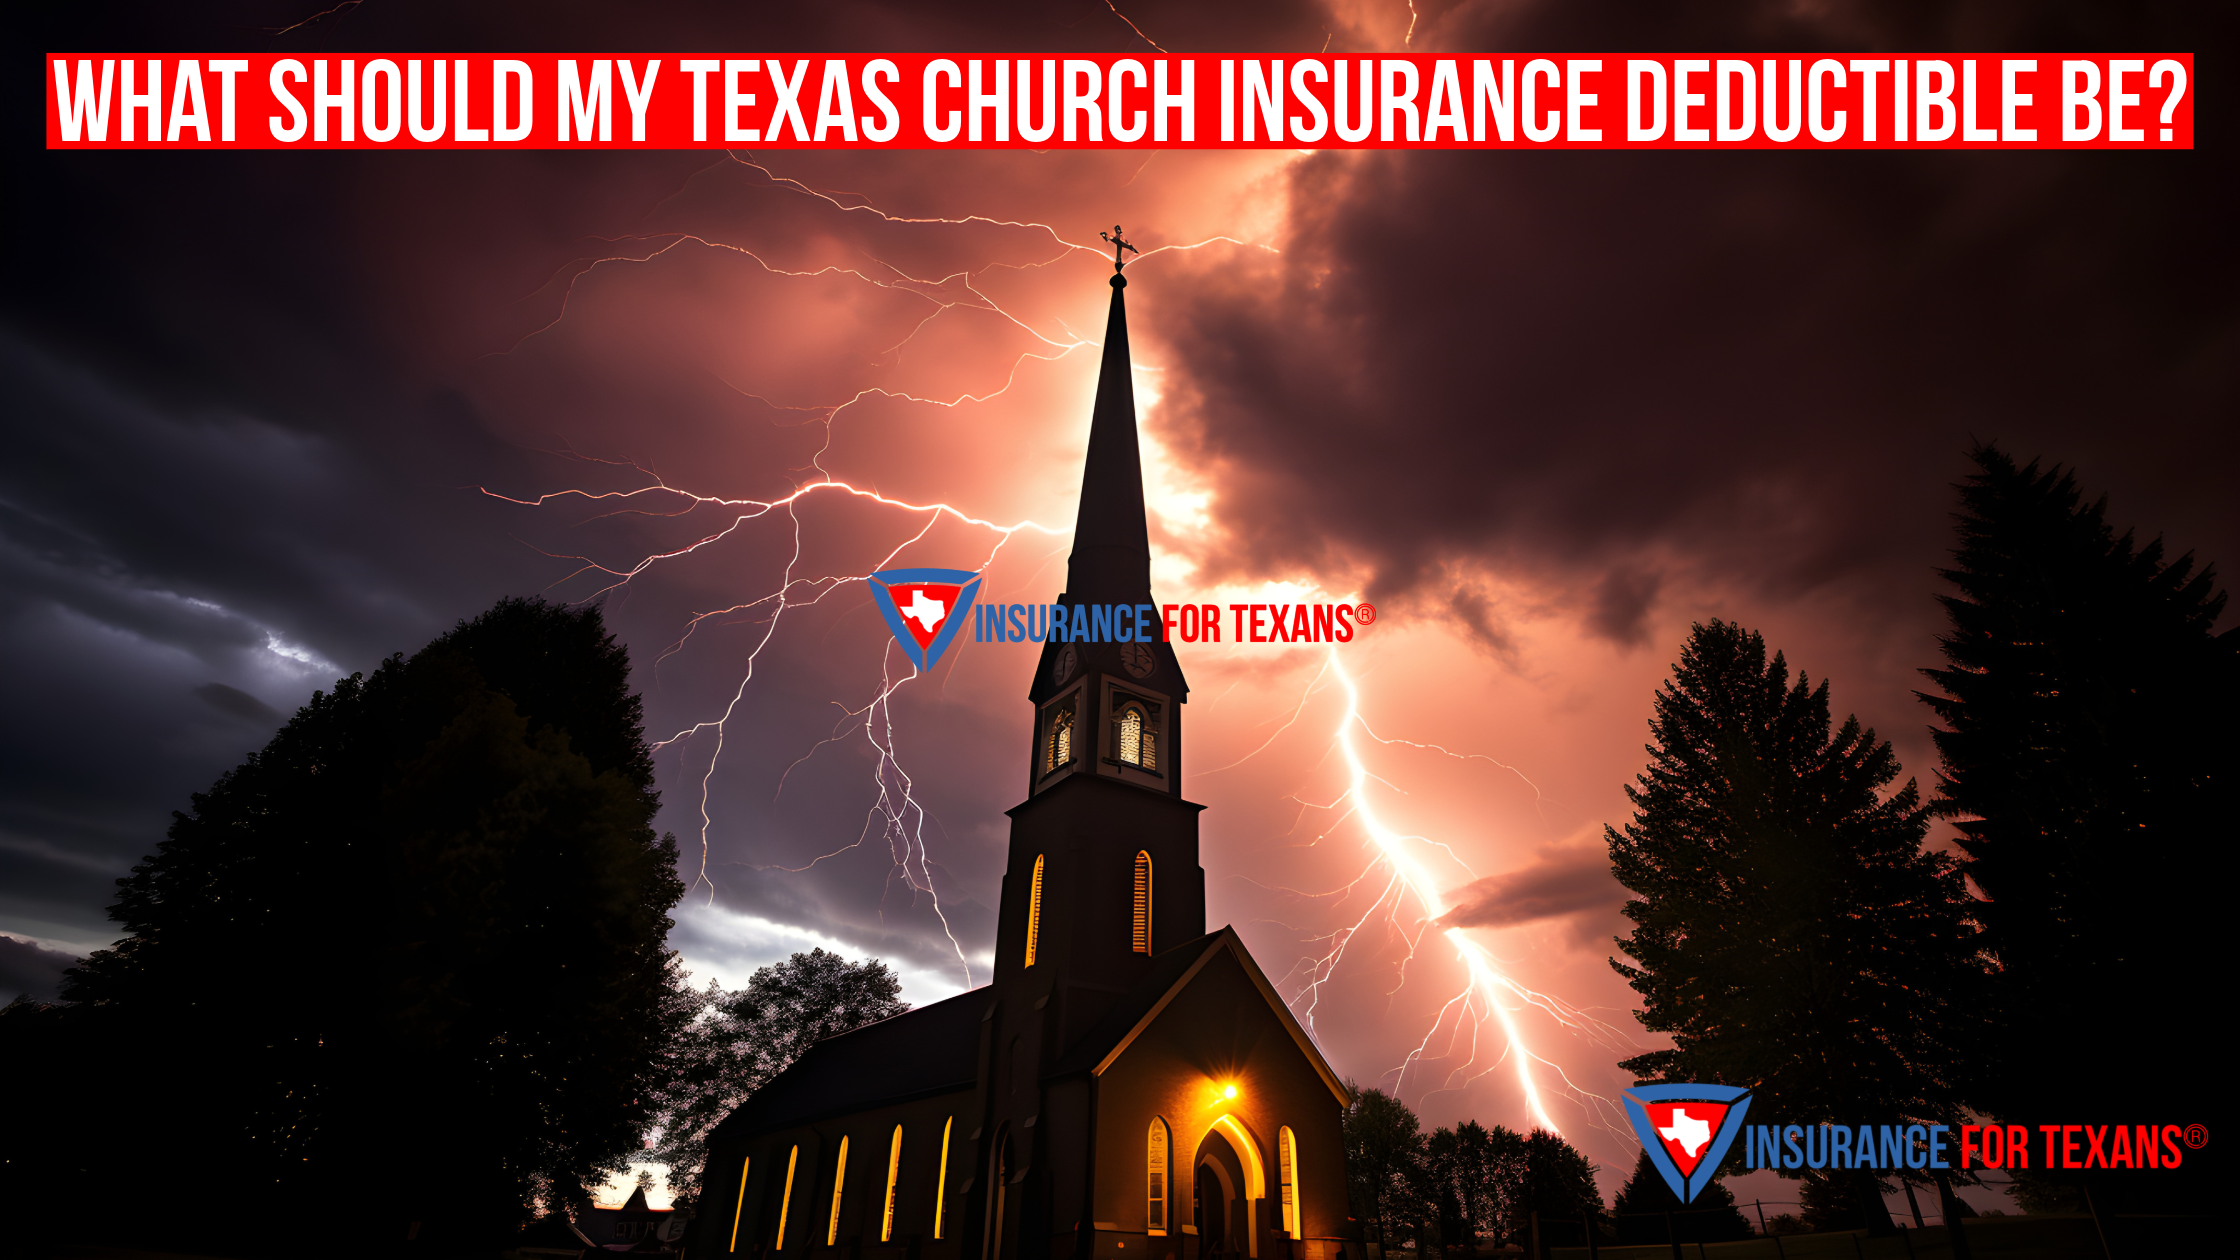 What Should My Texas Church Insurance Deductible Be?